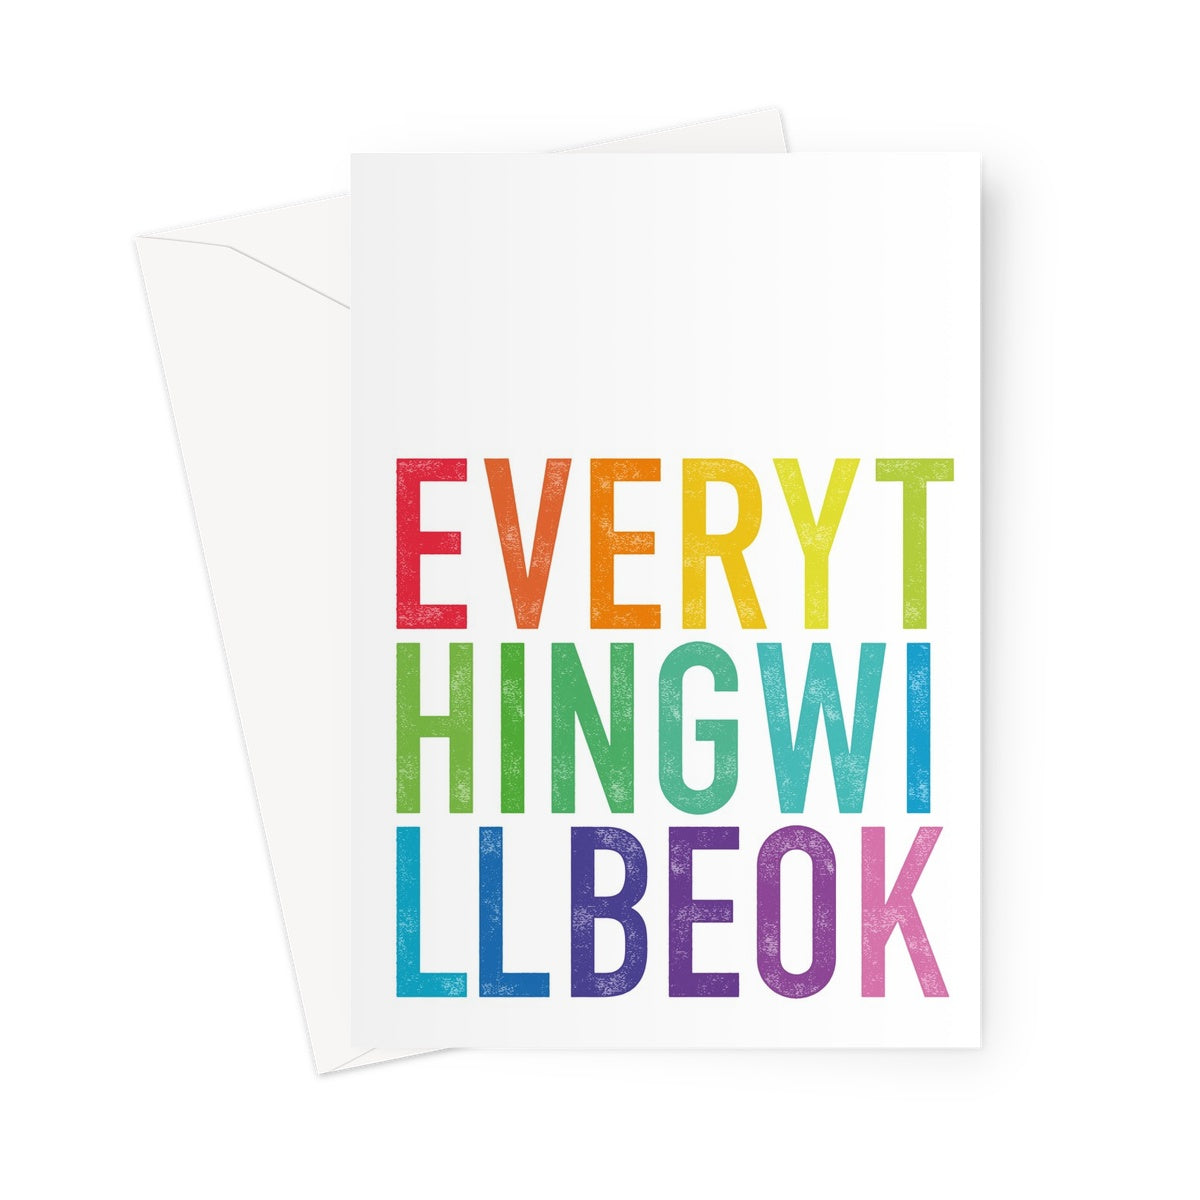 EVERYTHING WILL BE OK - White/Rainbow Greeting Card